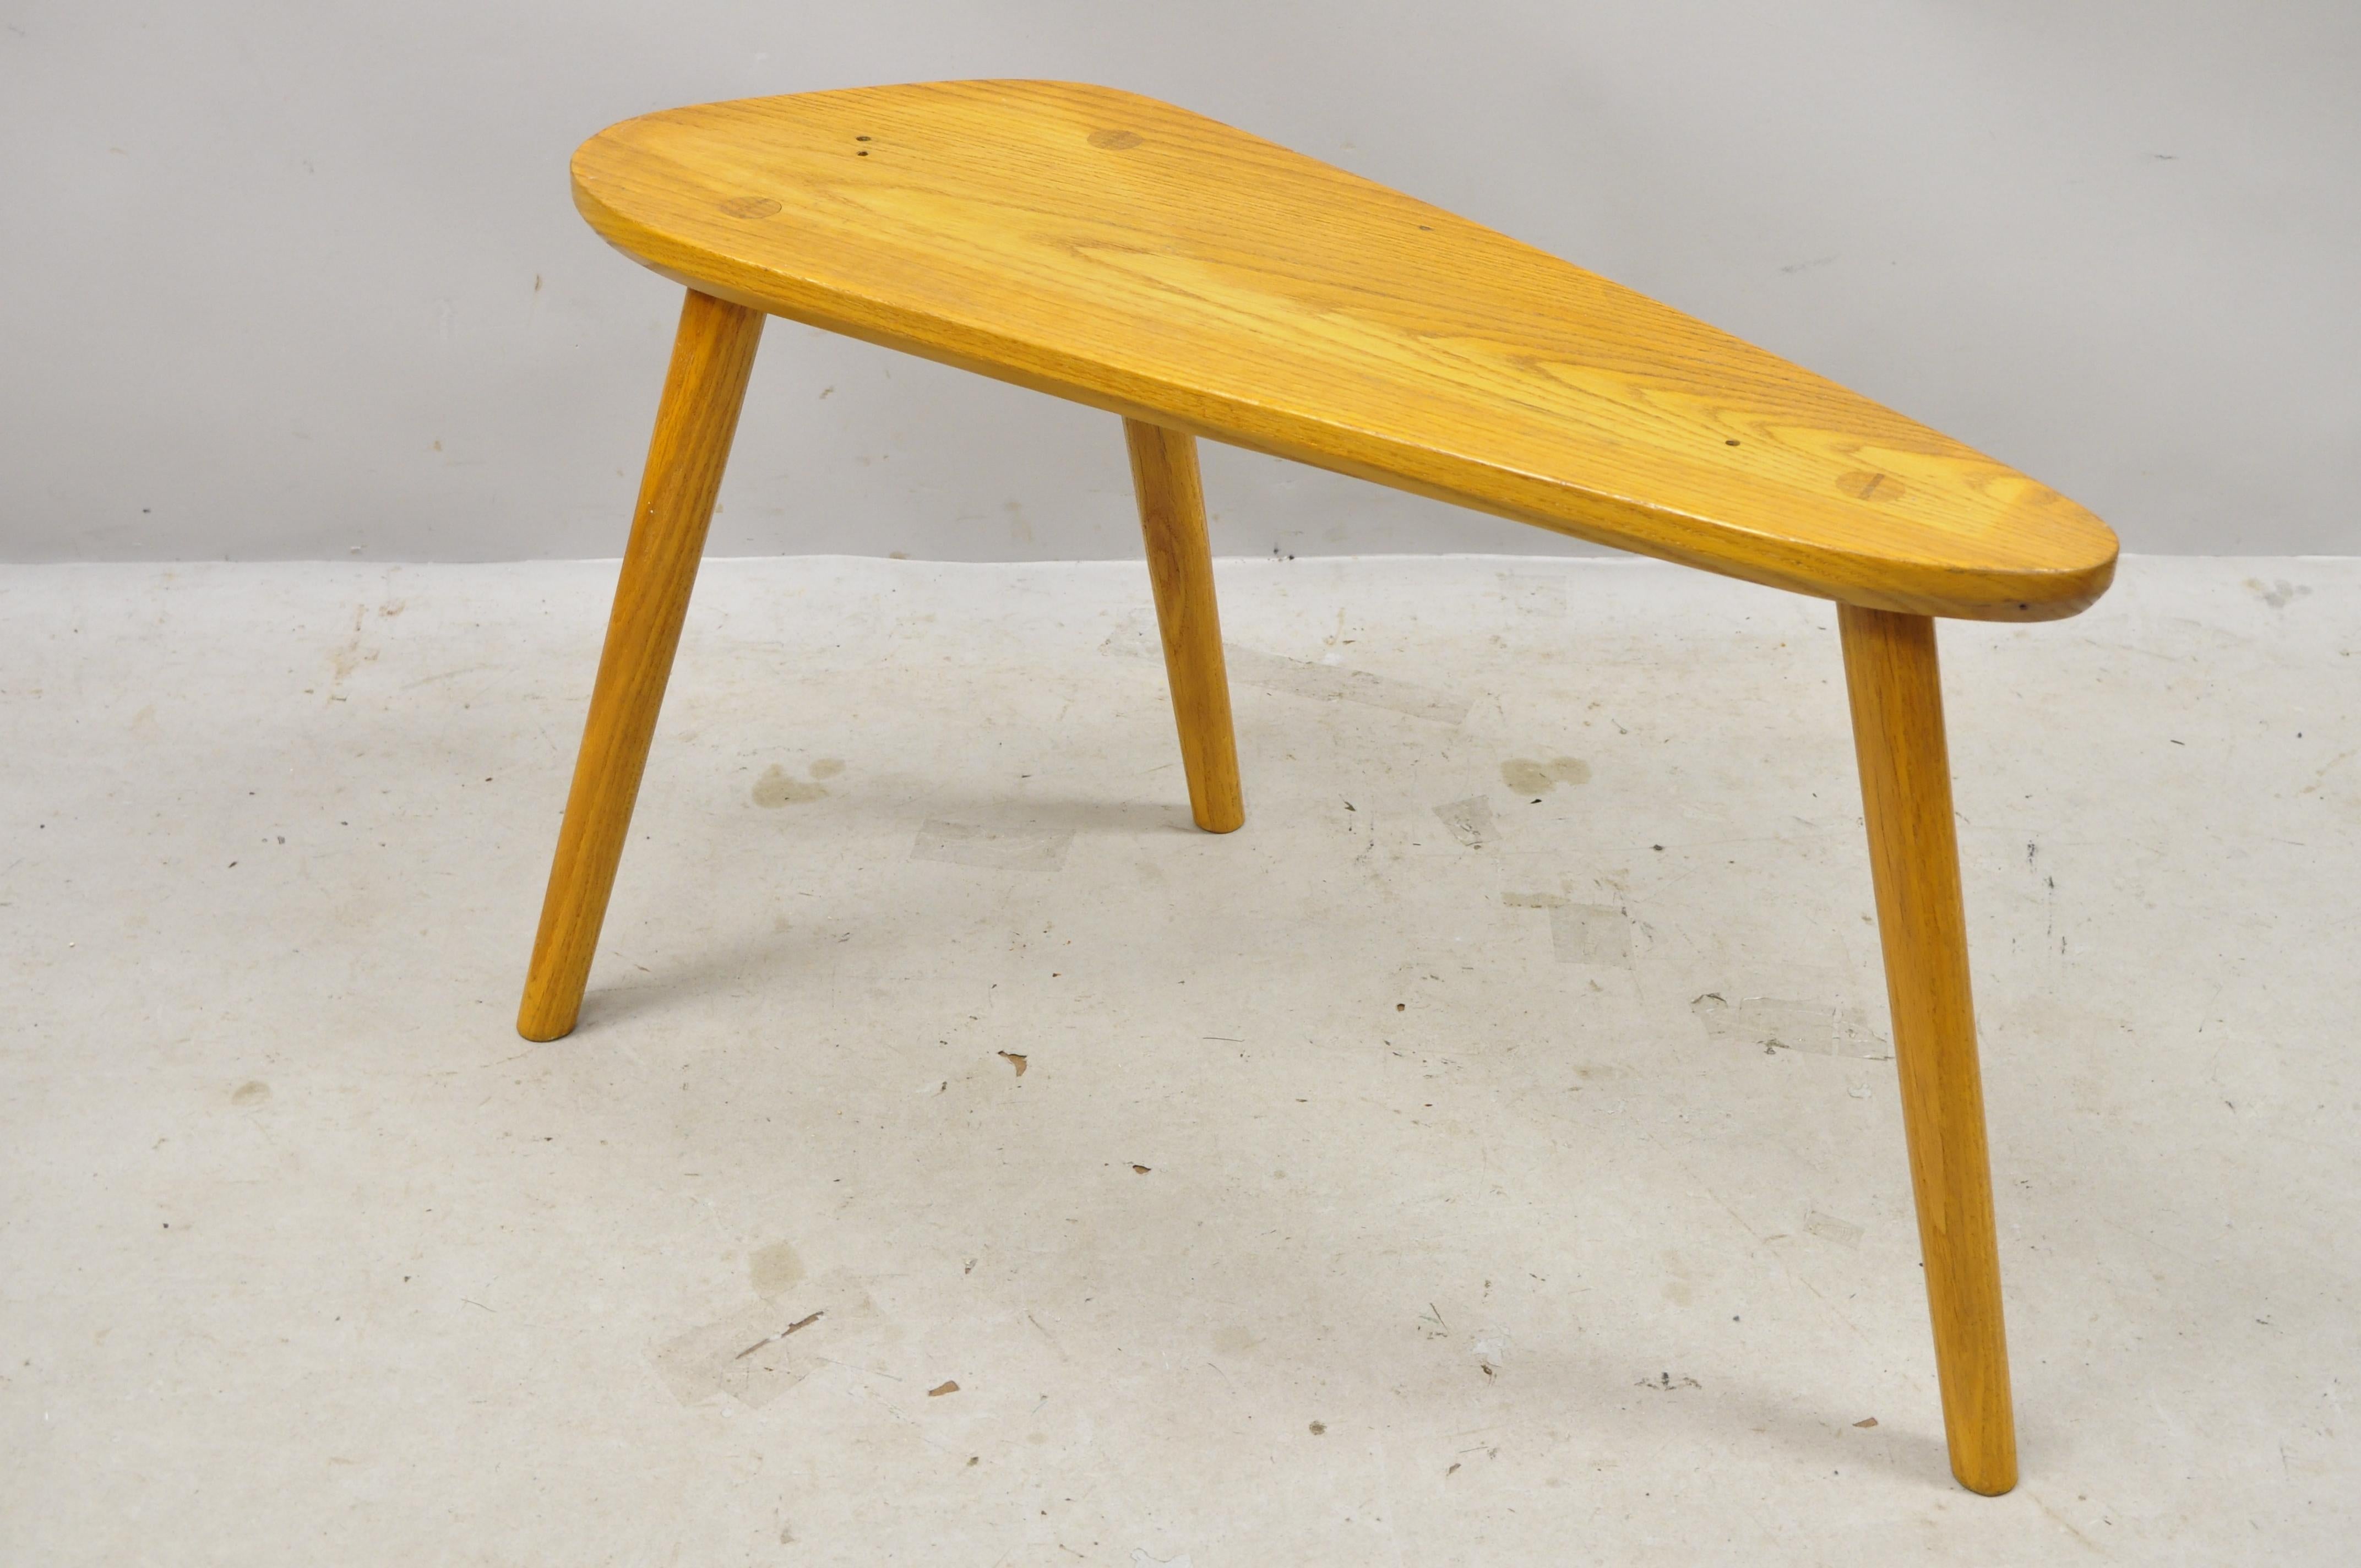 Midcentury Danish modern tripod birch oakwood bench side accent table. Item features exposed joints, solid wood construction, beautiful wood grain, tapered legs, very nice vintage item, quality craftsmanship, great style and form, circa mid-20th